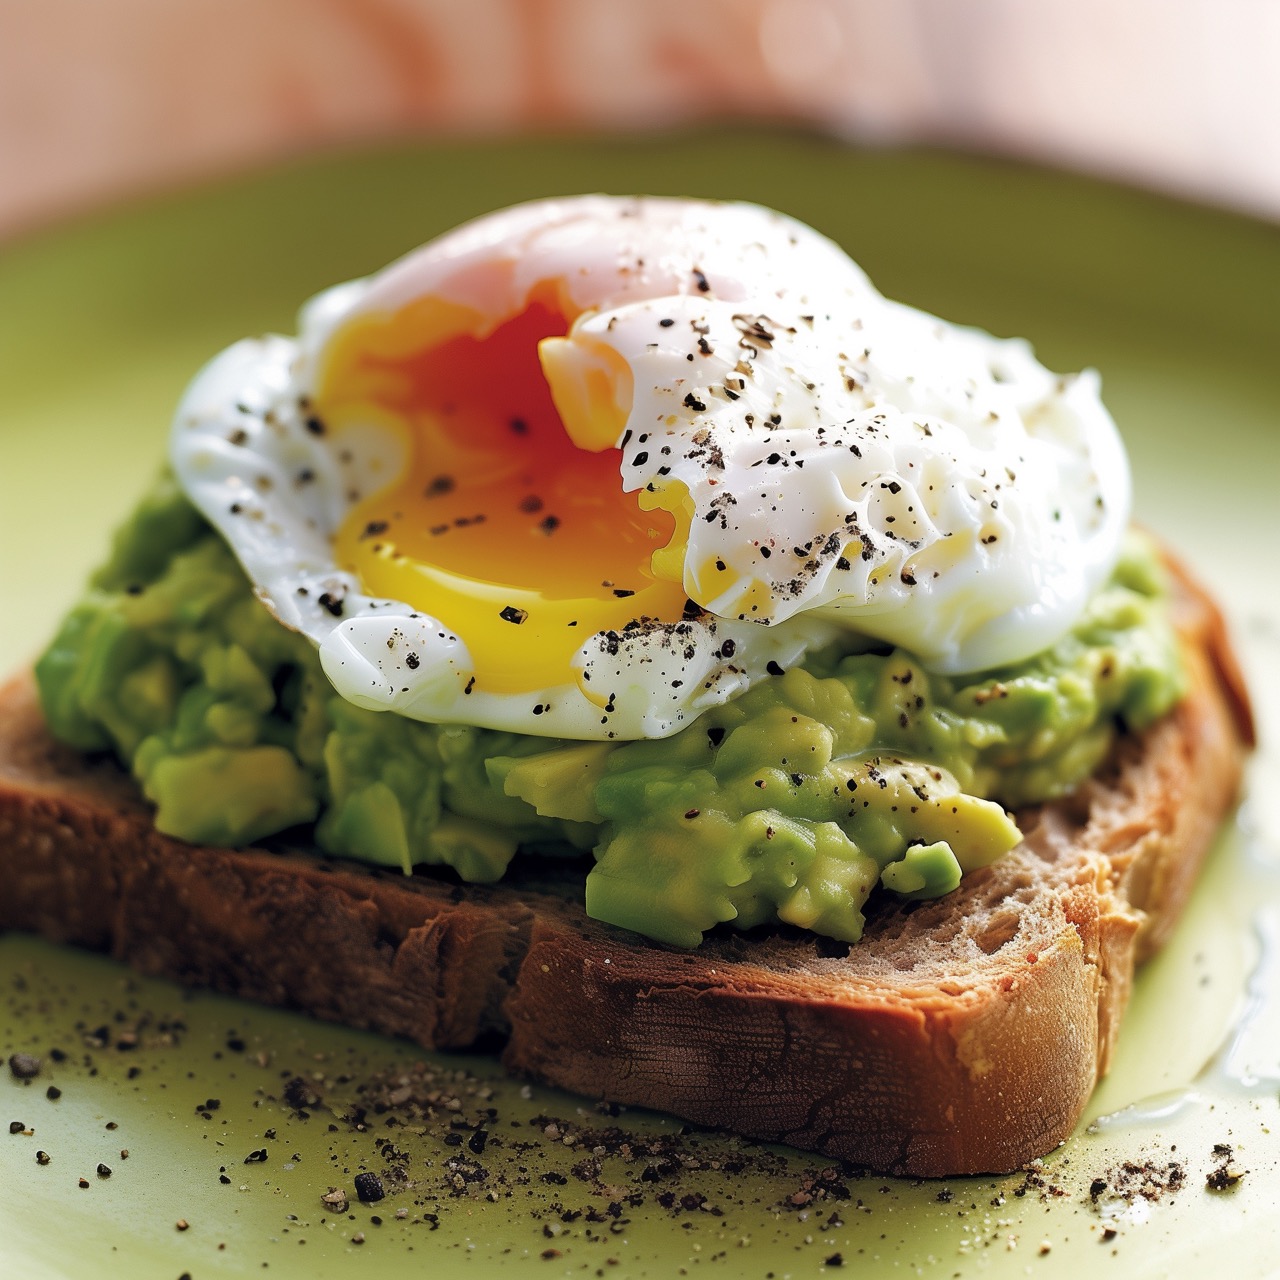 Poached egg and mashed avocado on whole grain toast